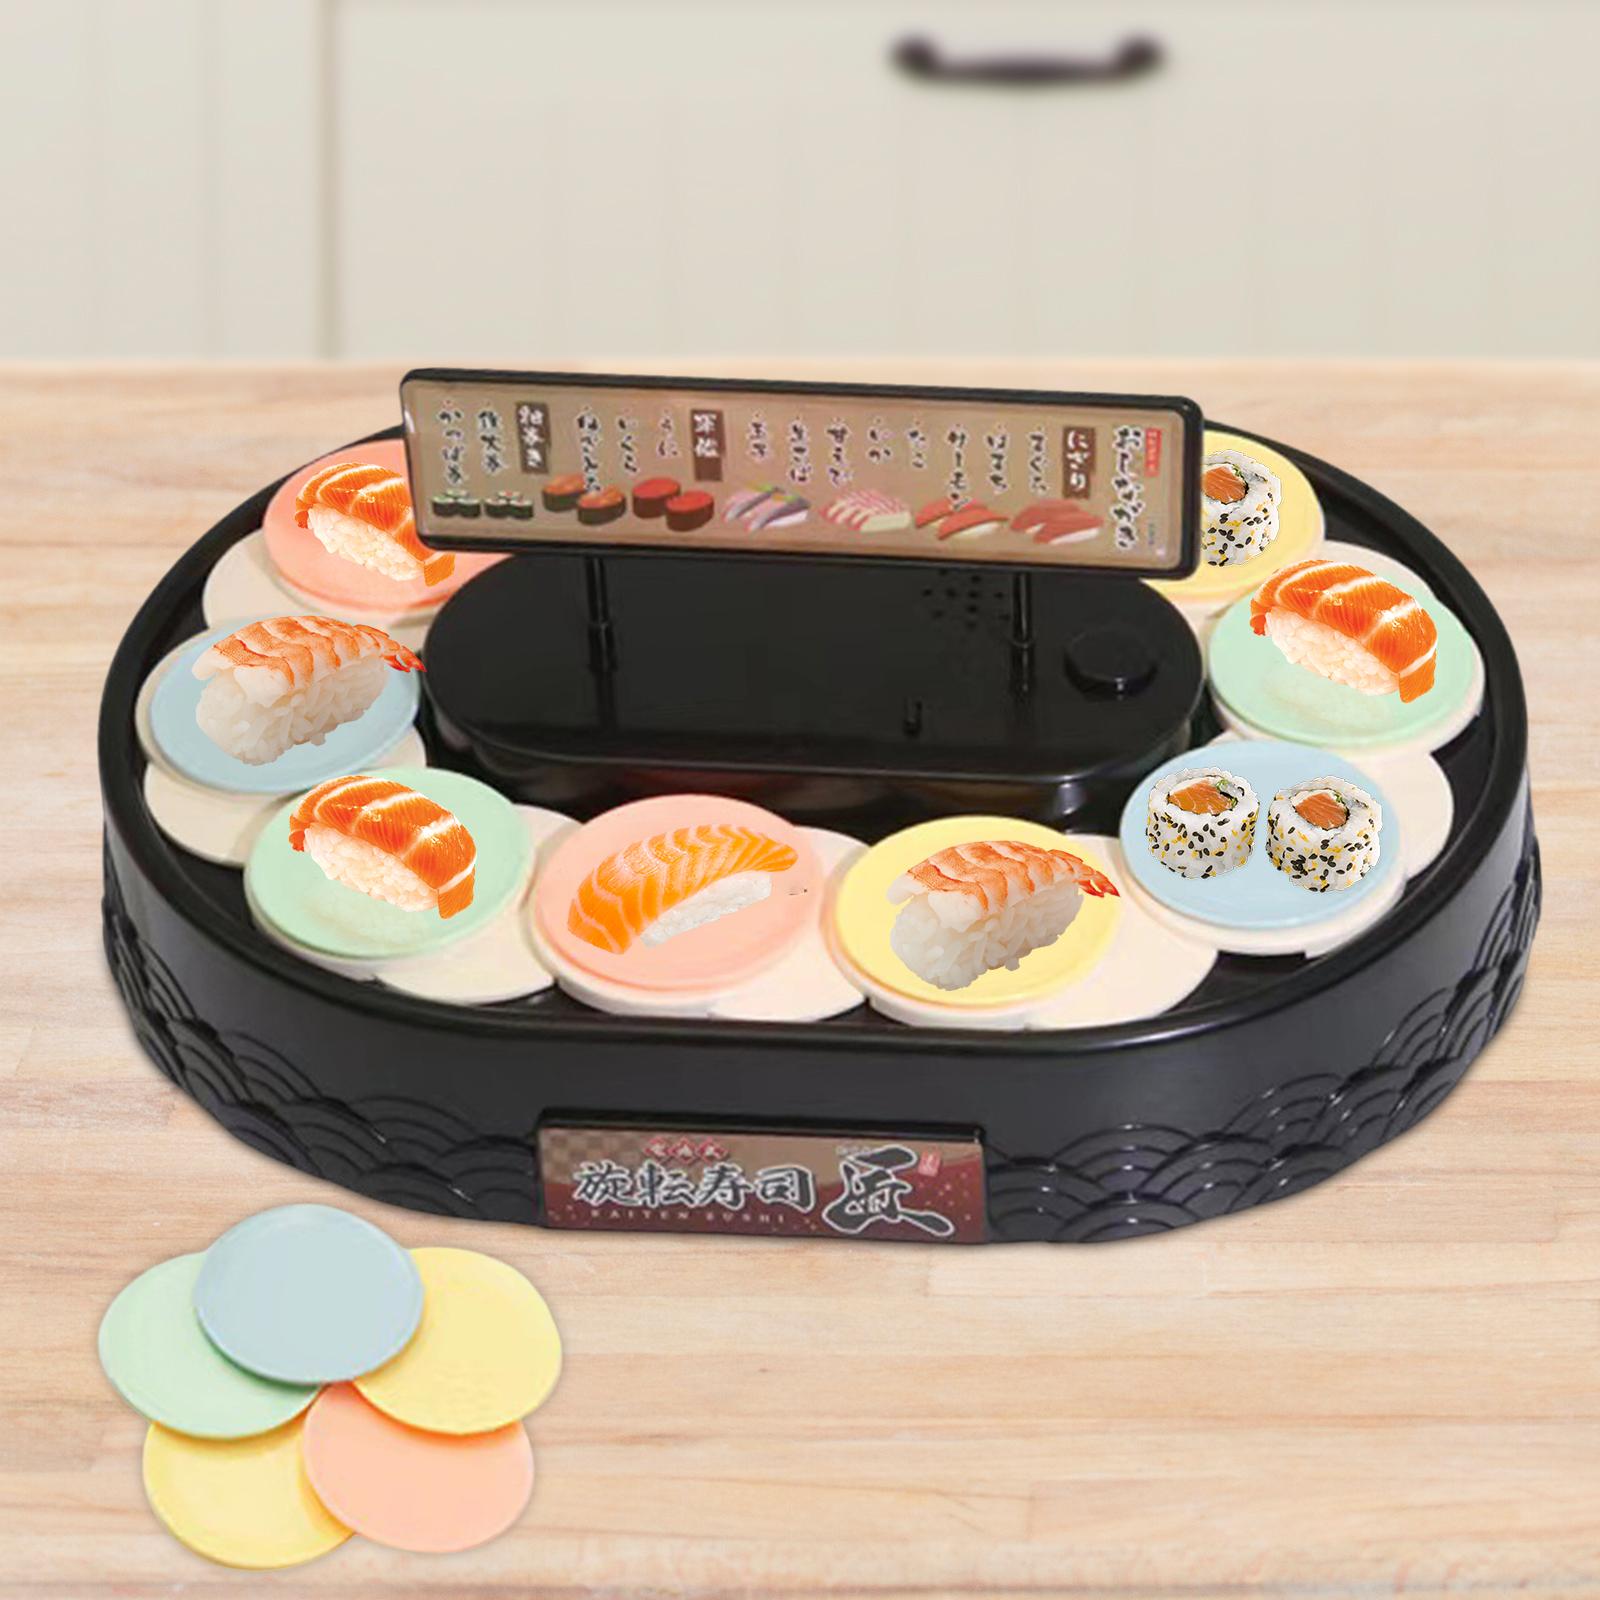 Motorized Photography Display 360 Degree Electric Rotating Turntable  Automatic Revolving Platform for Product Display Cake